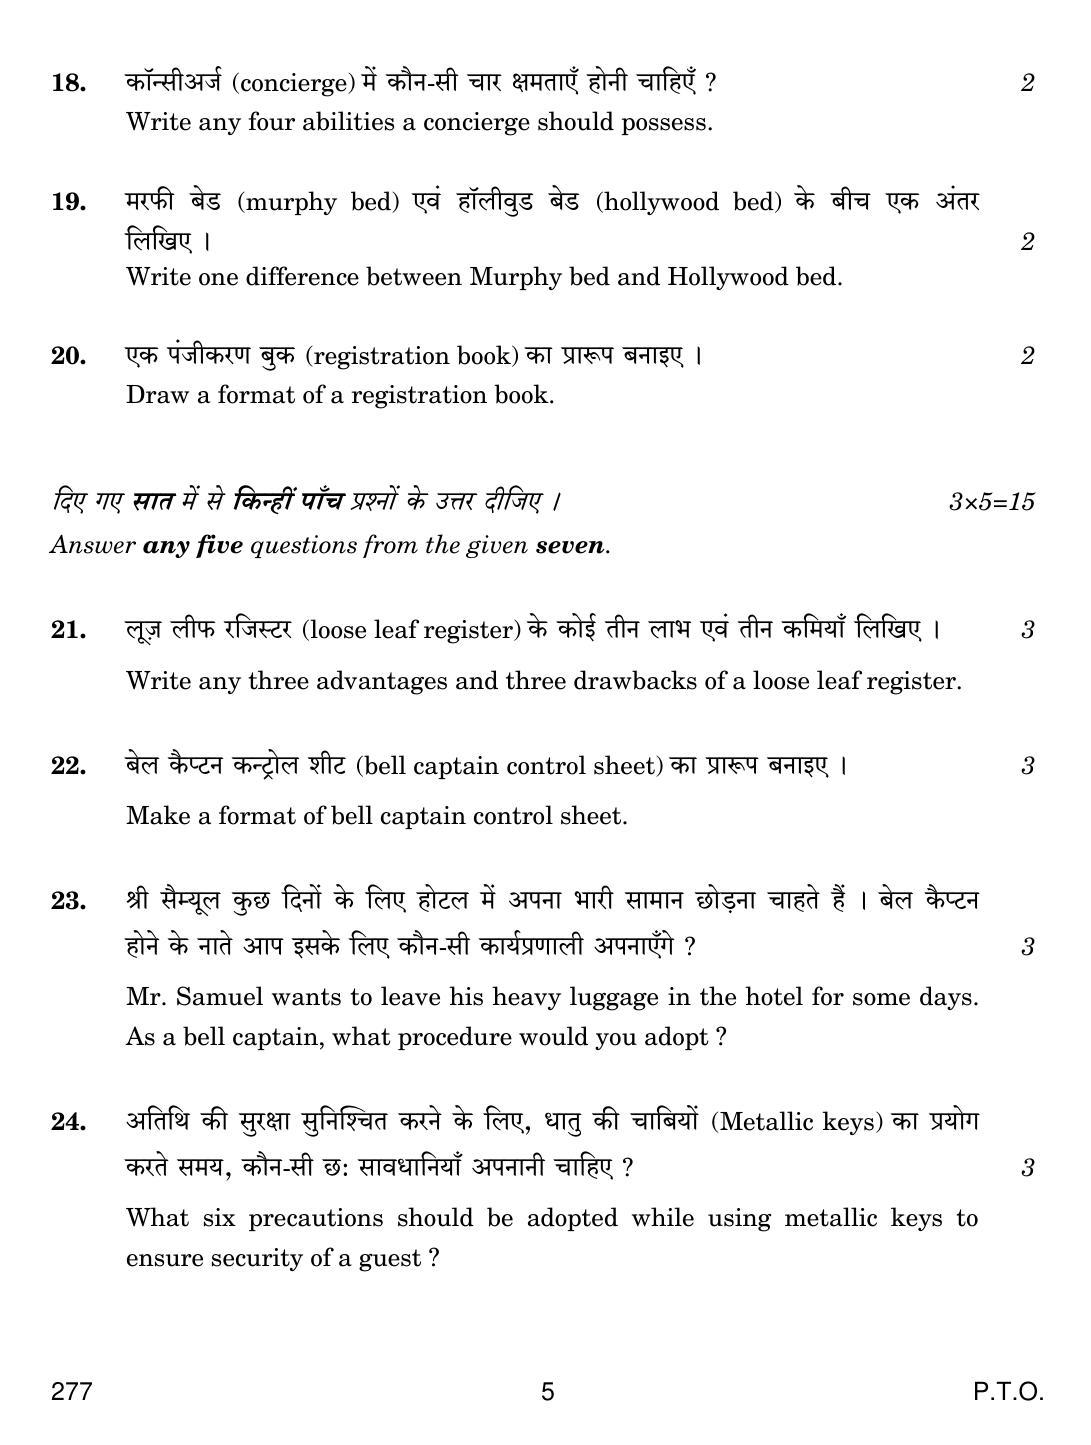 CBSE Class 12 277 Front Office Operations 2019 Question Paper - Page 5